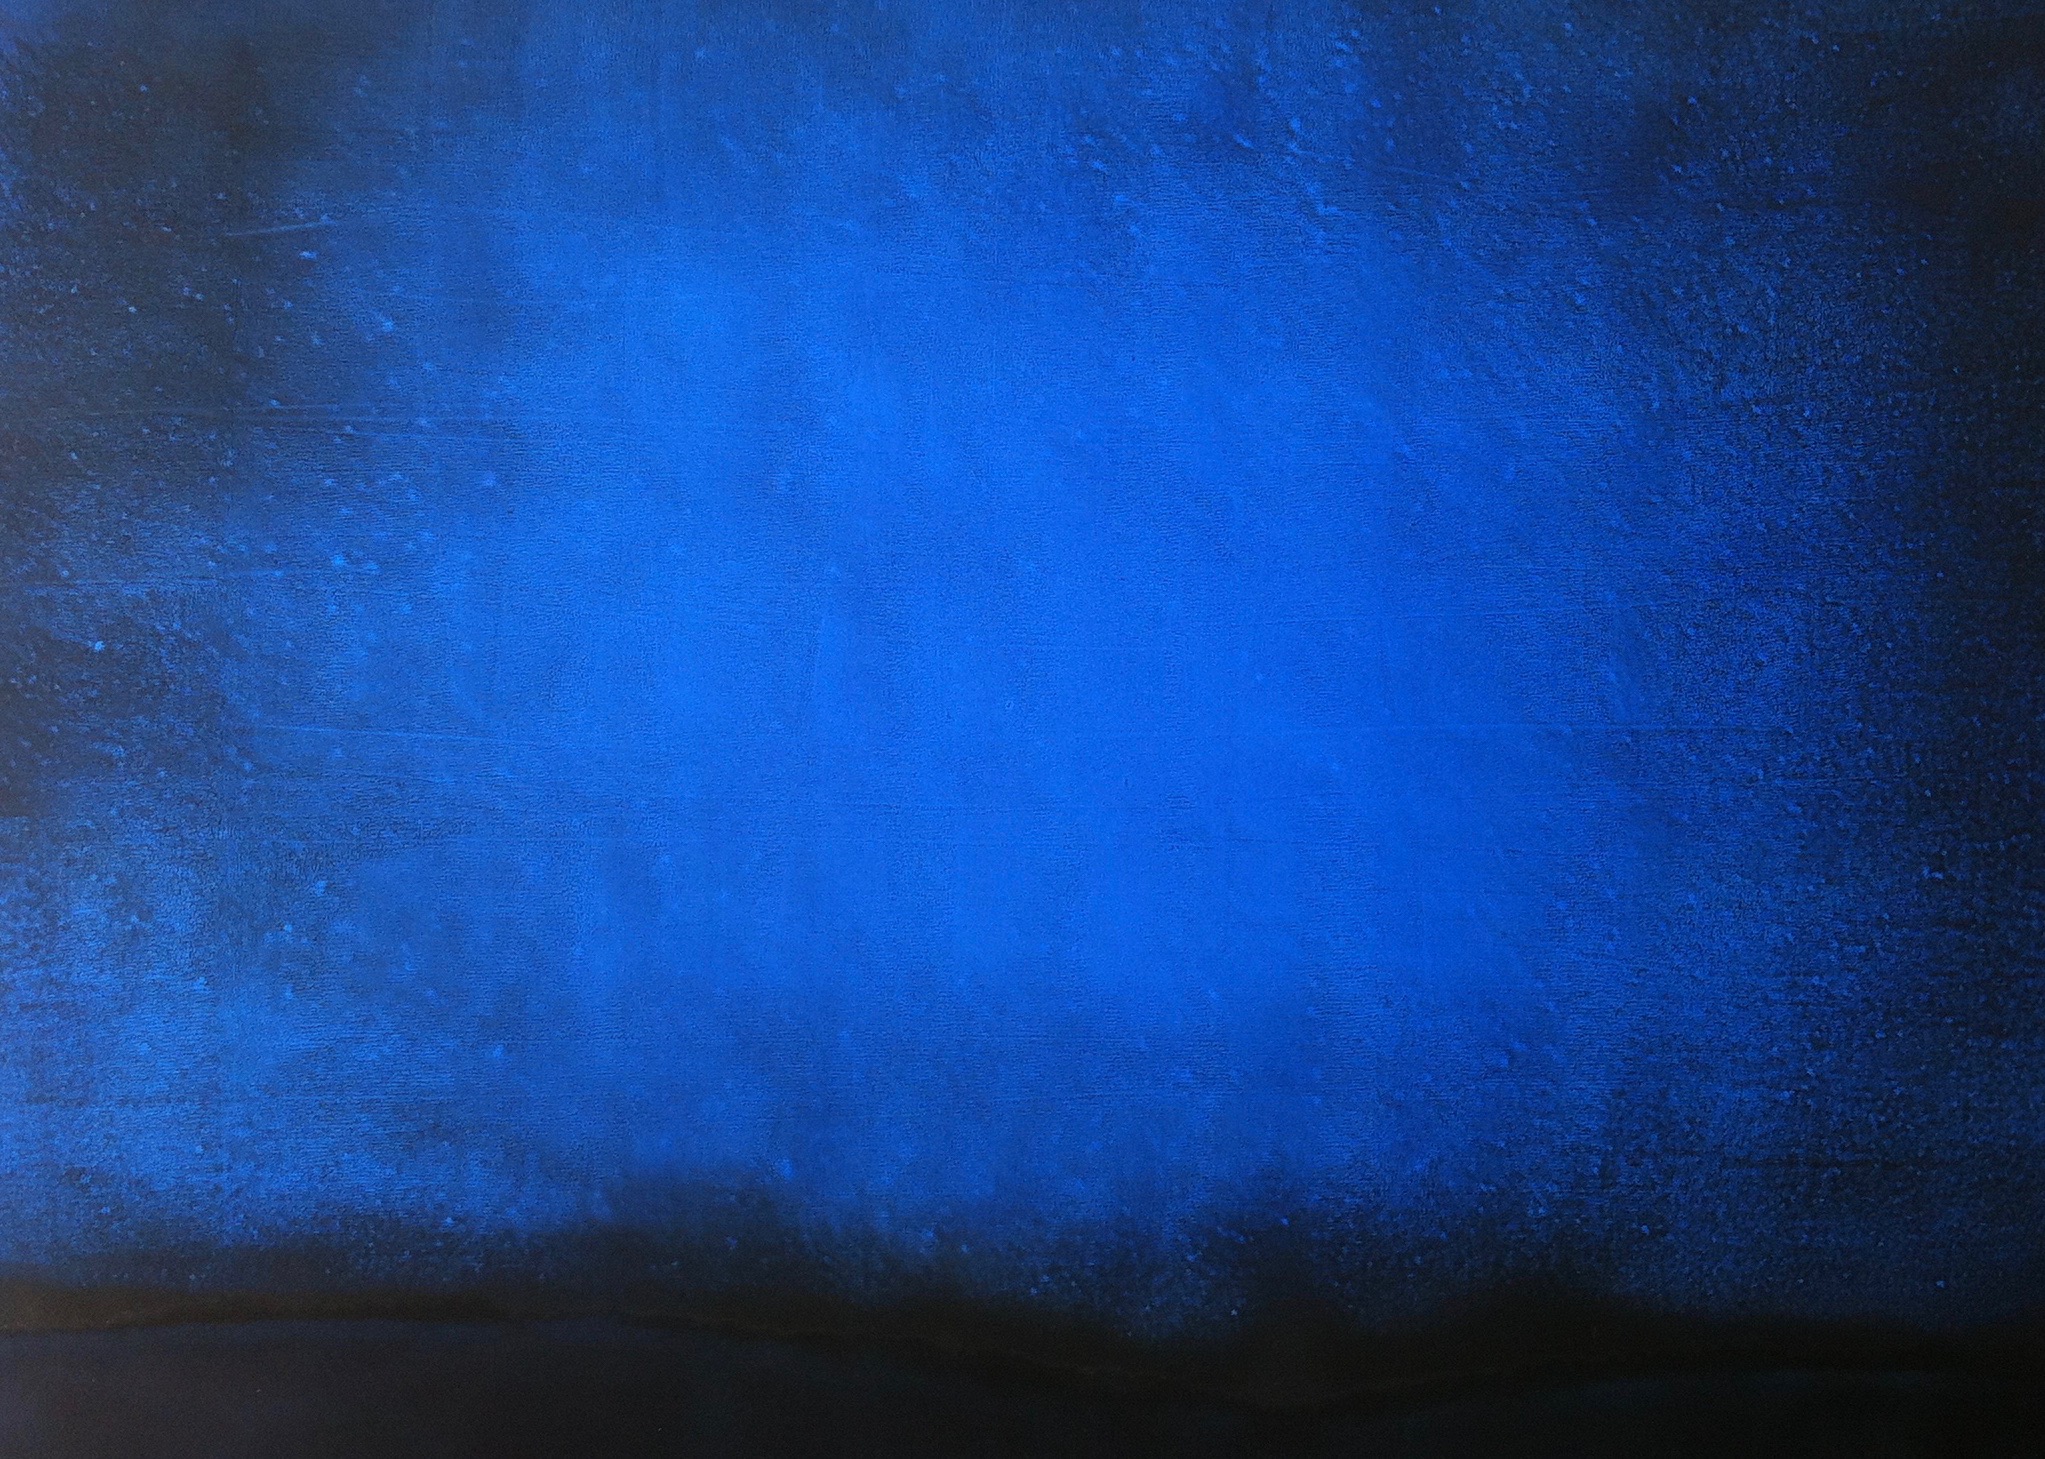  Untitled (Cobalt), 2013. Oil on Paper, 26 x 35 inches. Exhibited in “blue.”at Nassau County Museum of Art, 2020. 